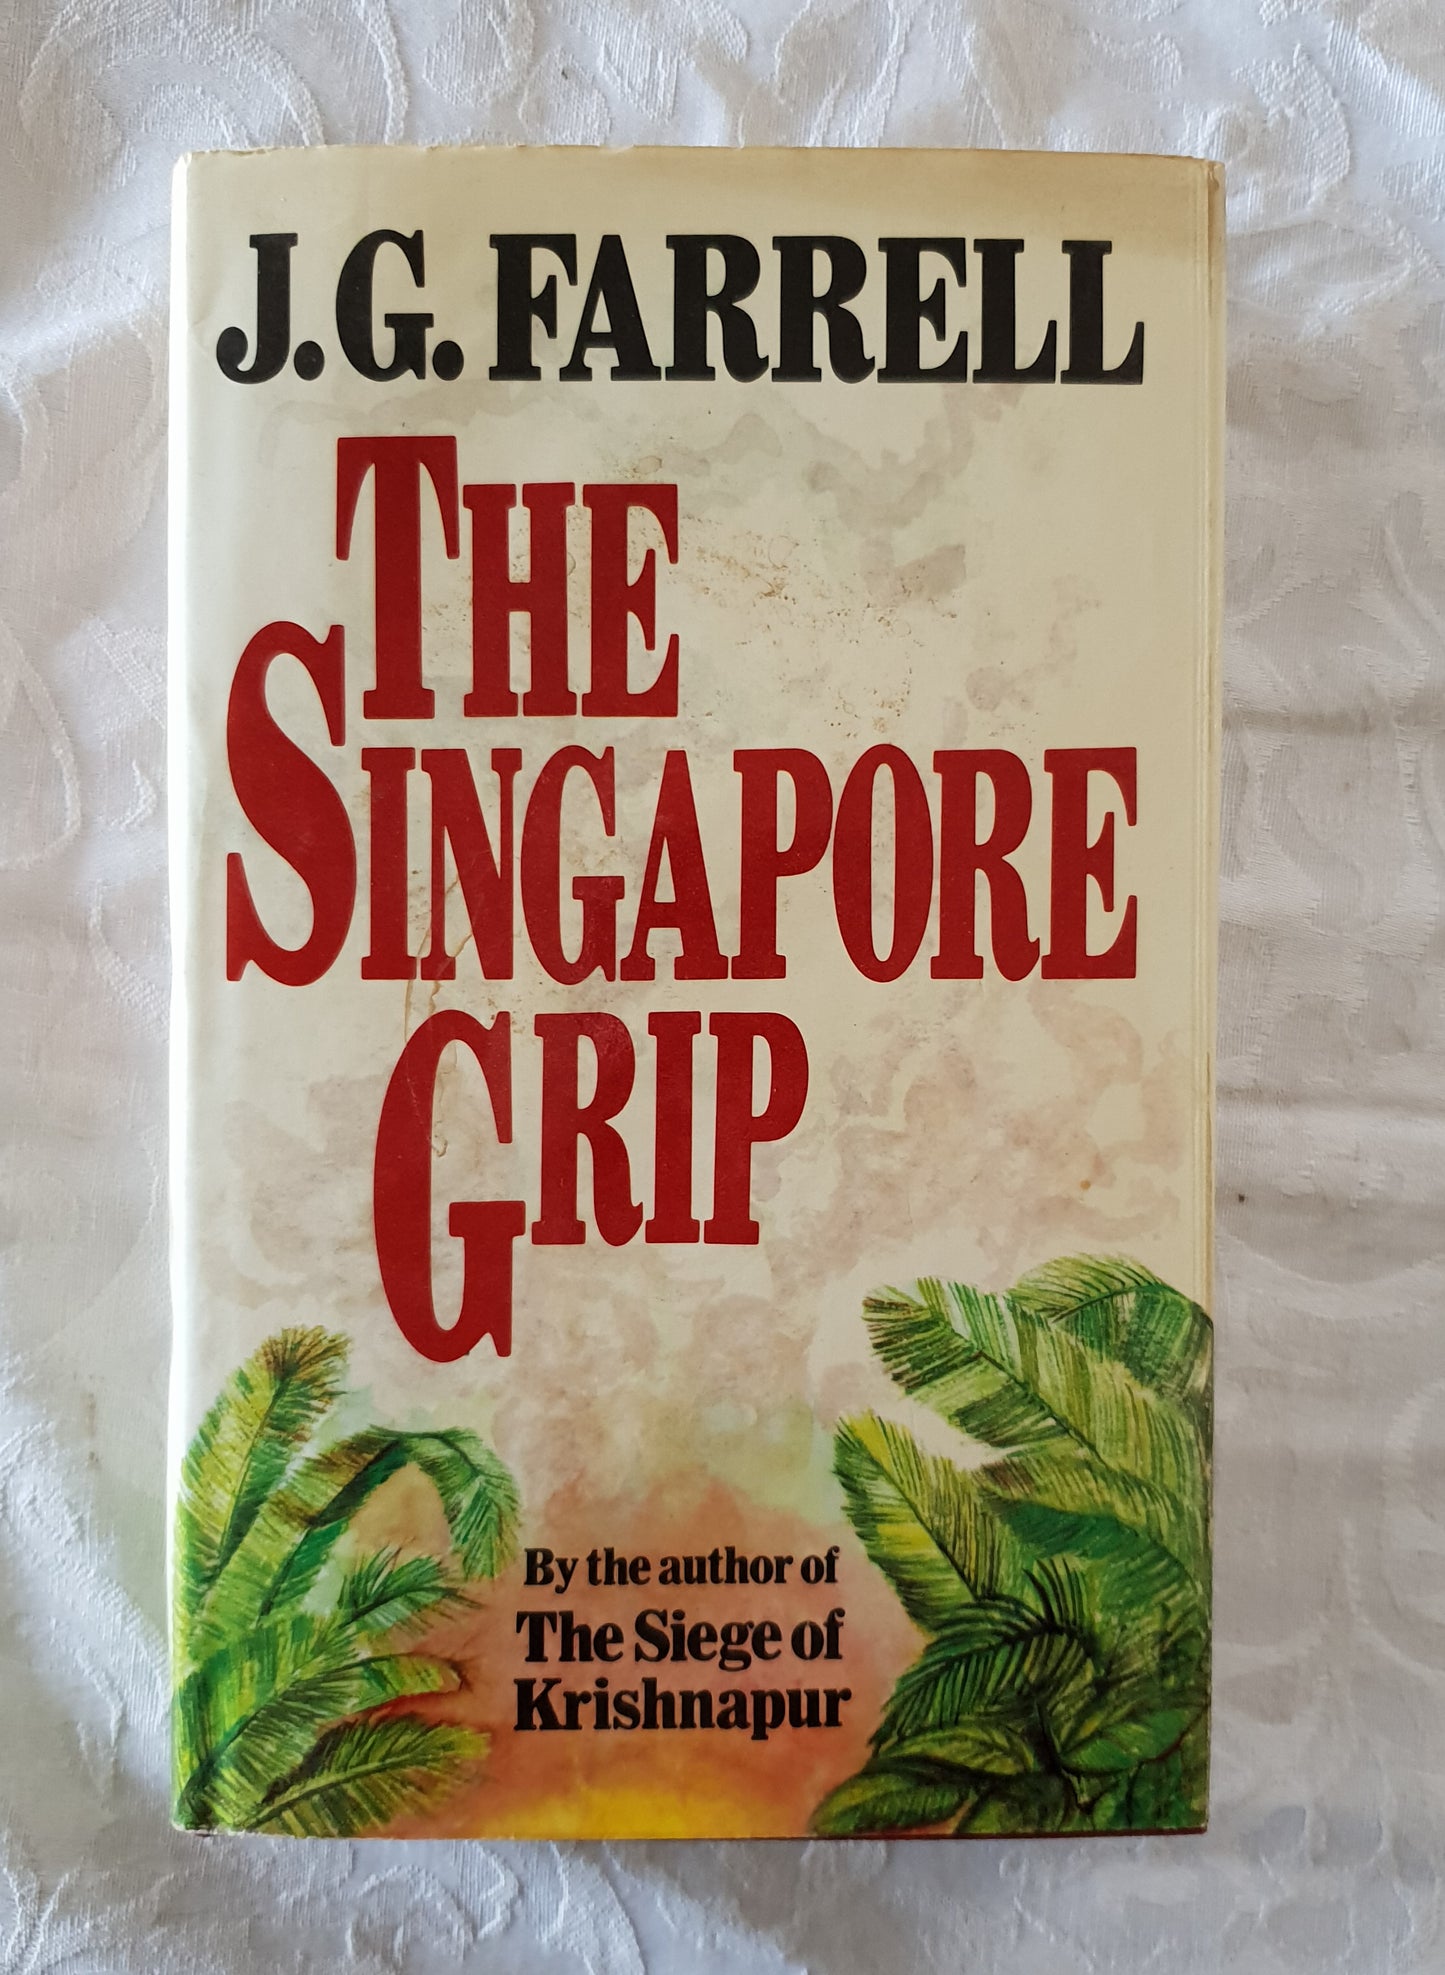 The Singapore Grip by J. G. Farrell